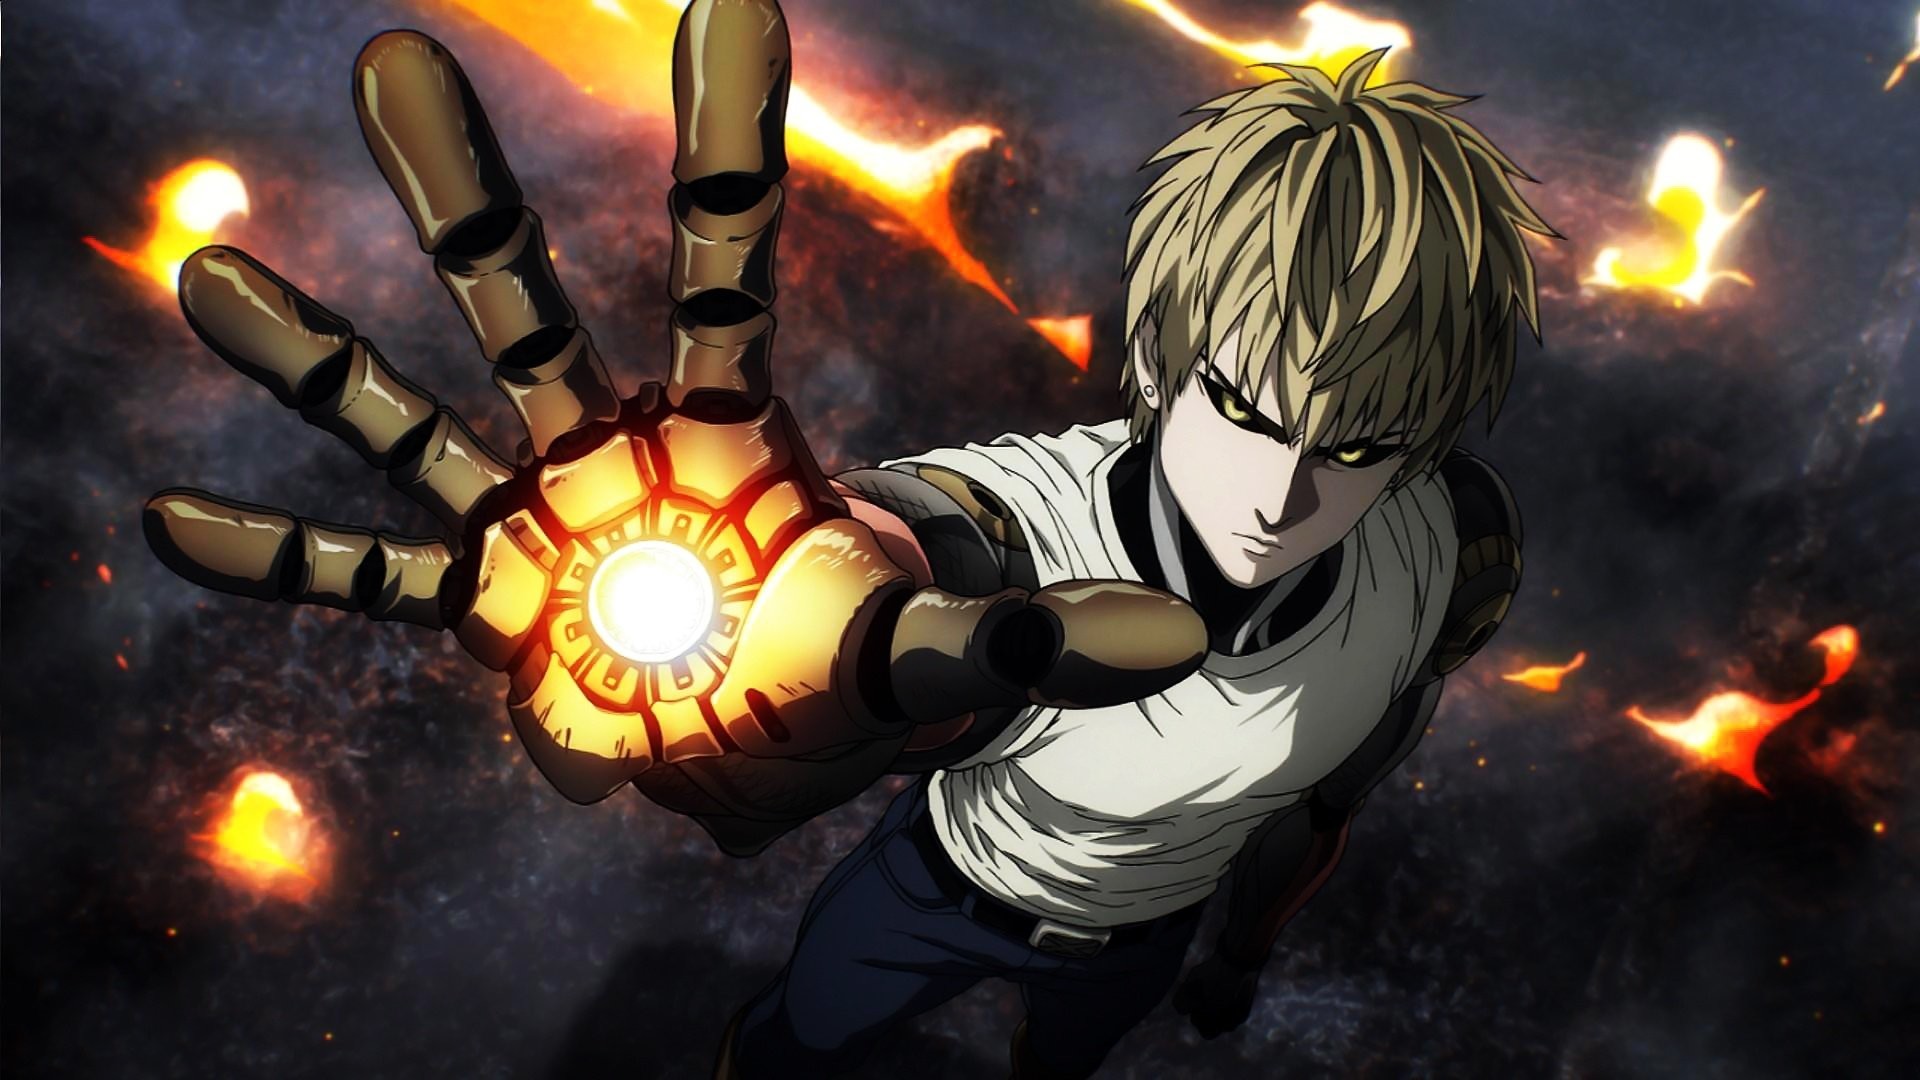 HD Wallpaper Background ID656714. Anime One Punch Man